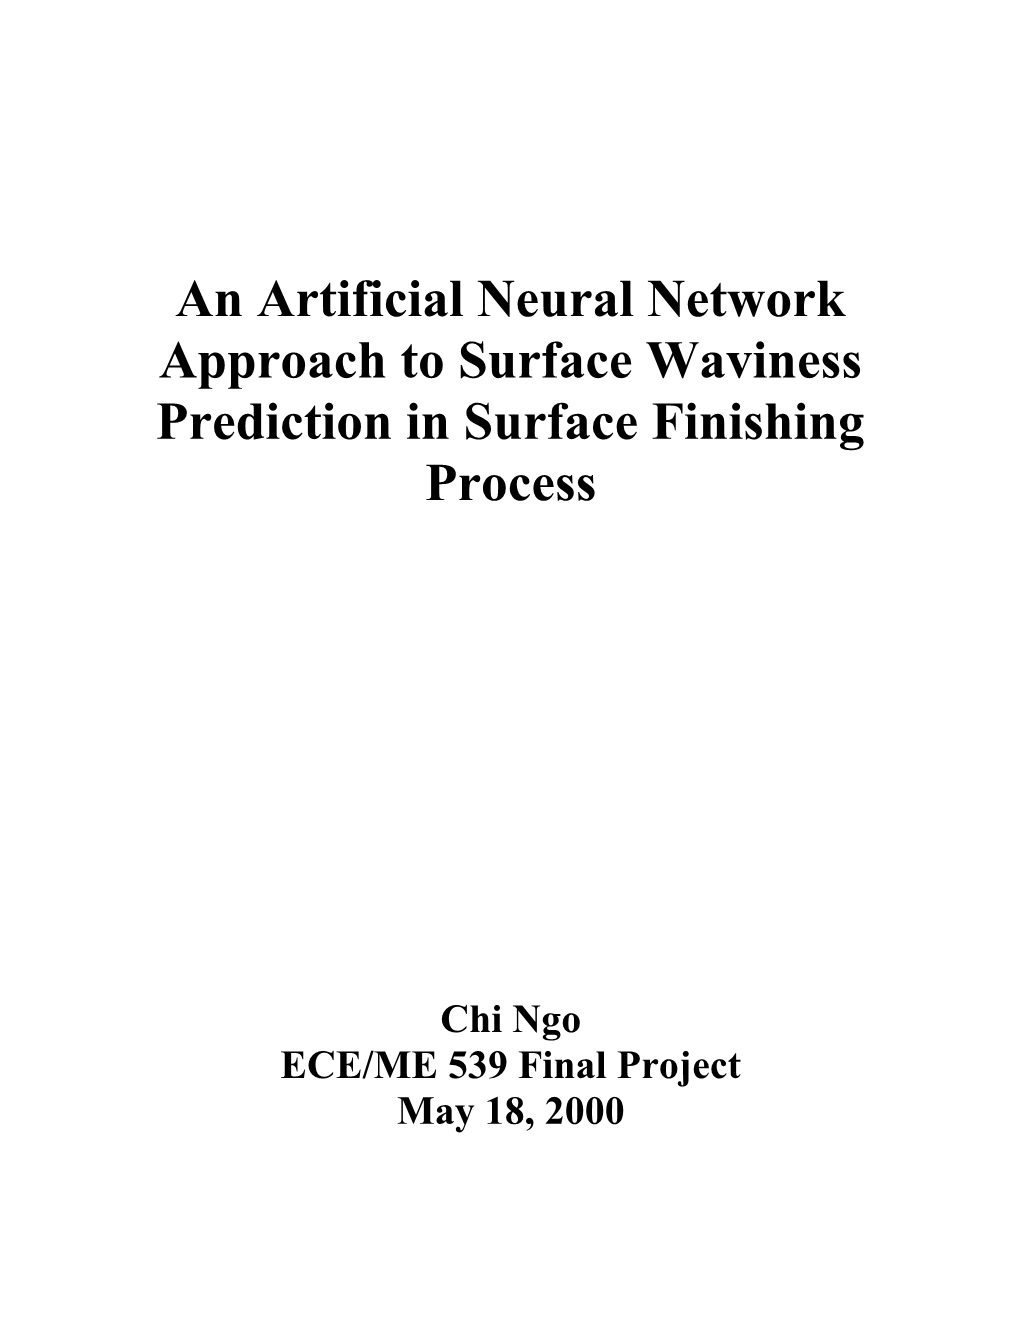 An Artificial Neural Network Approach to Surface Waviness Prediction in Surface Finishing